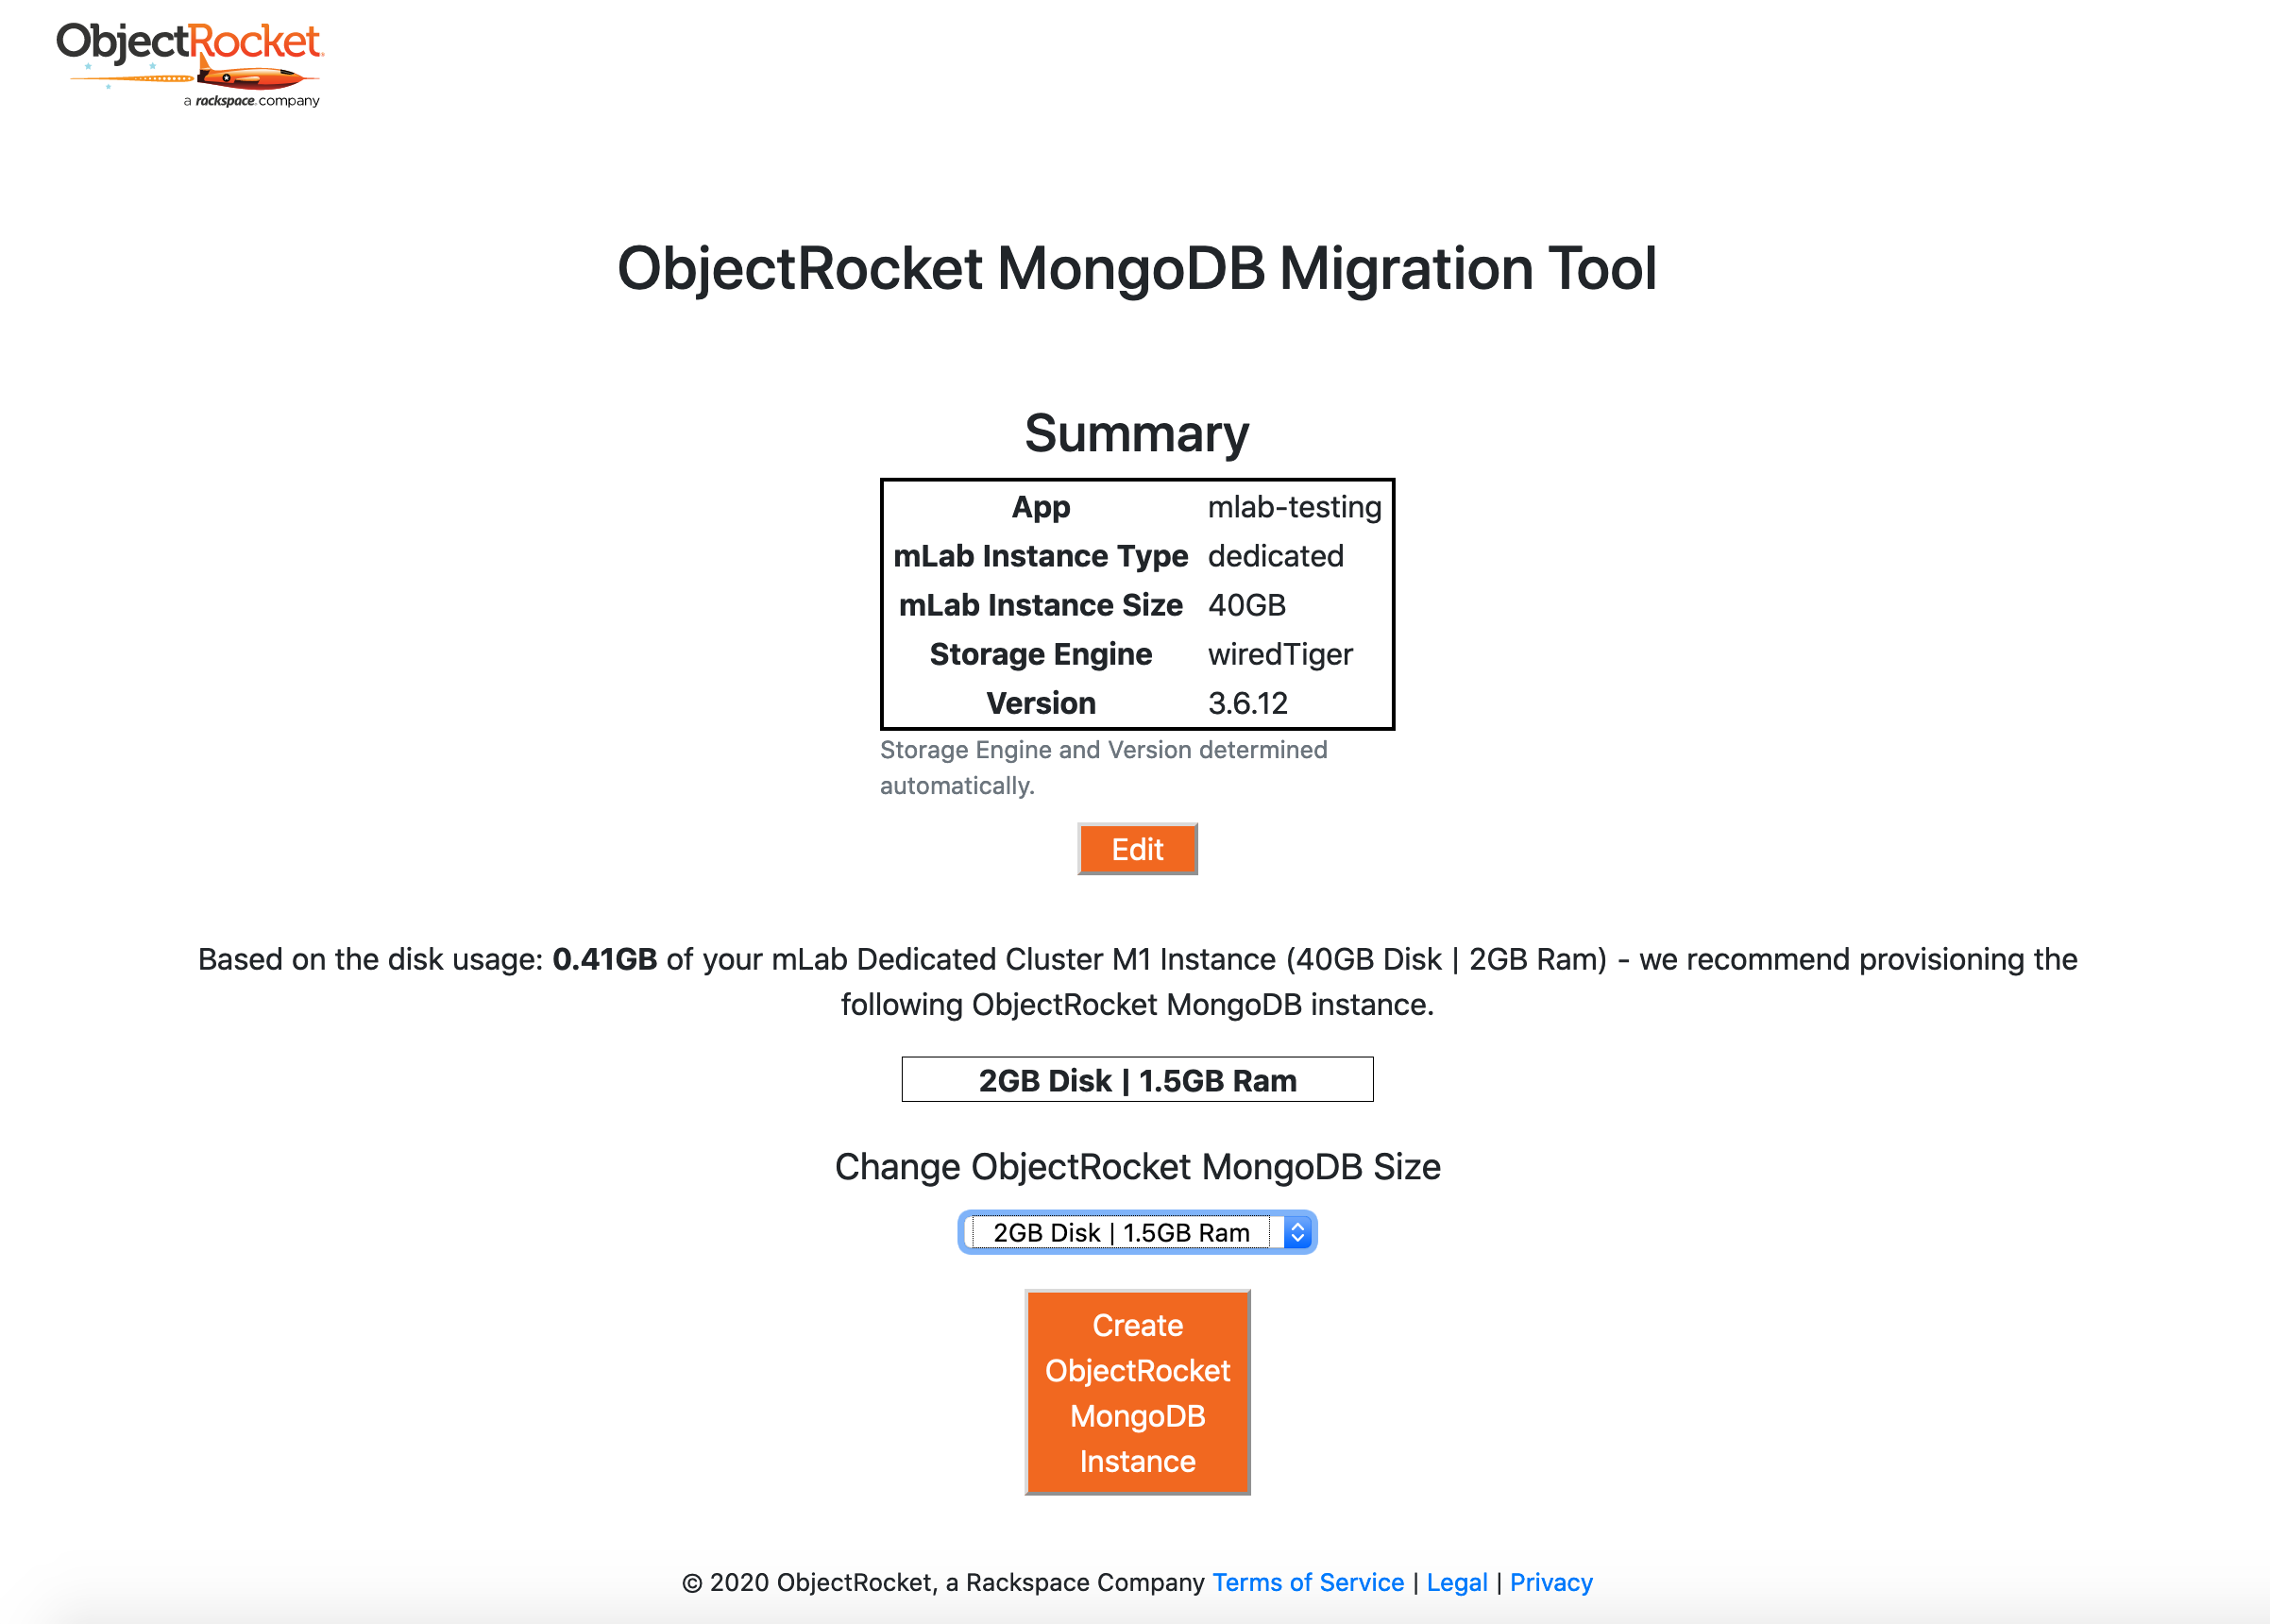 ObjectRocket MongoDB Provision and Pricing Page.